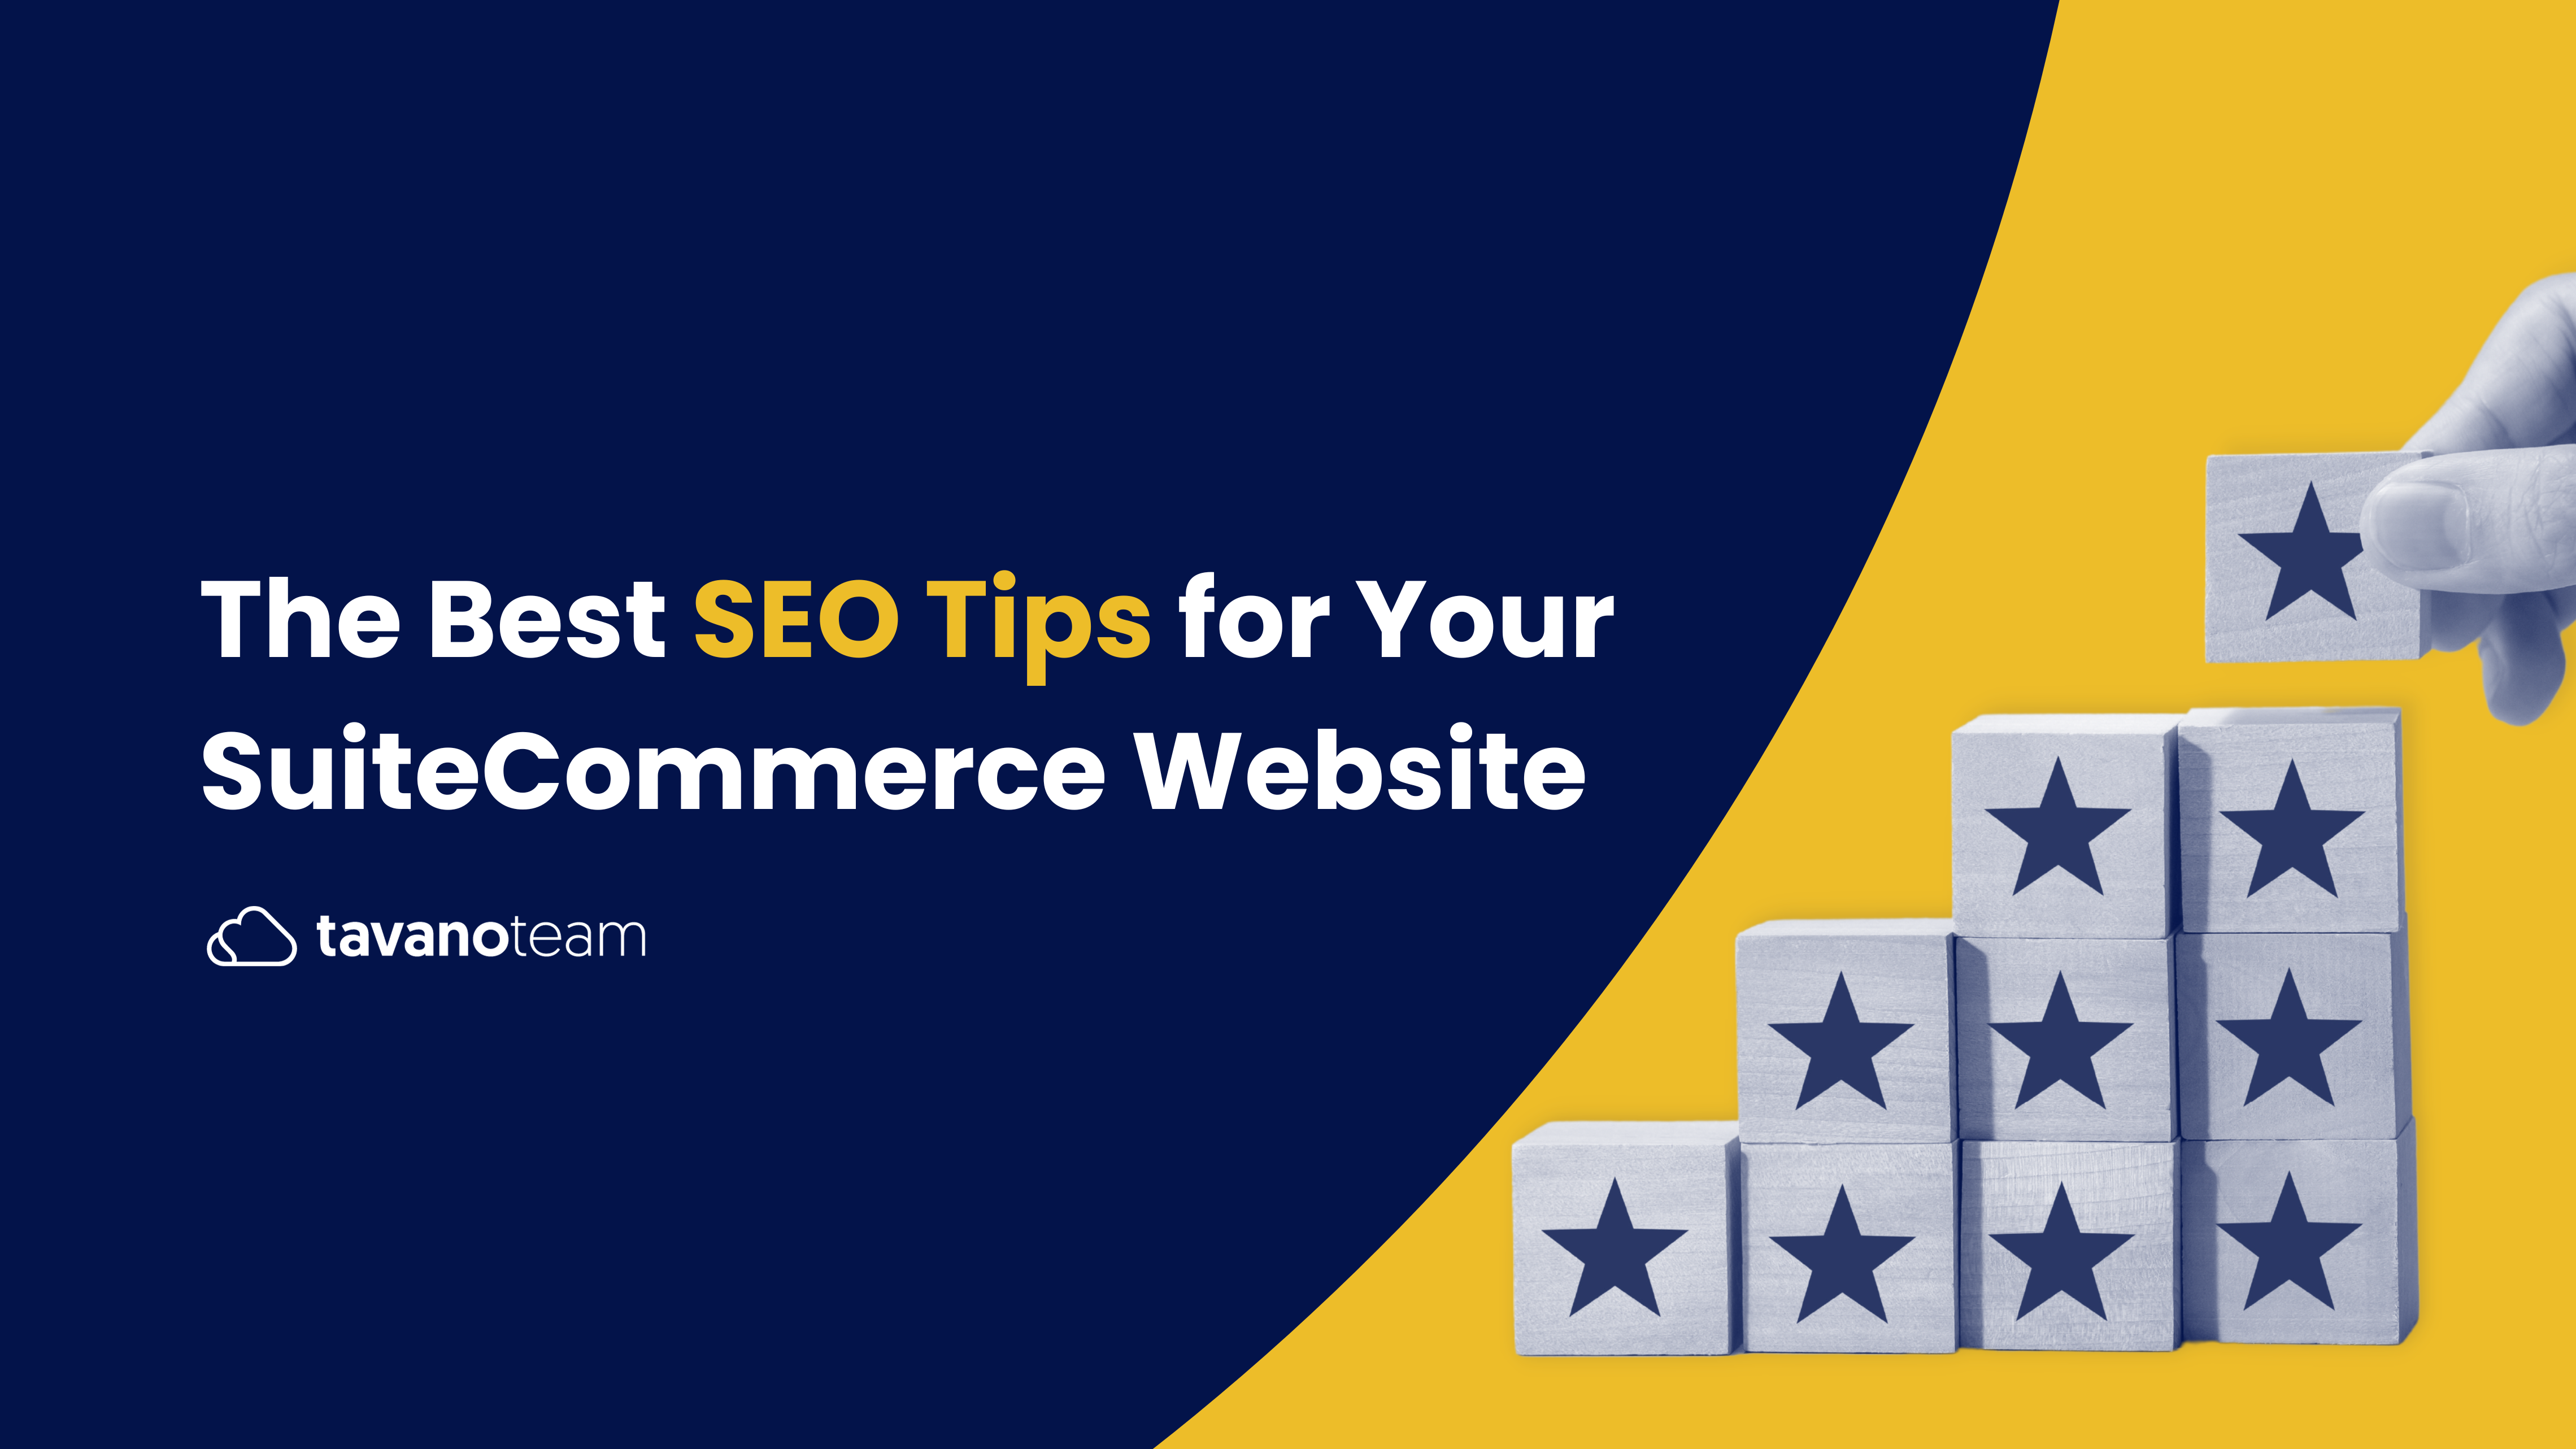 The-Best-SEO-Tips-for-Your-SuiteCommerce-Website-2